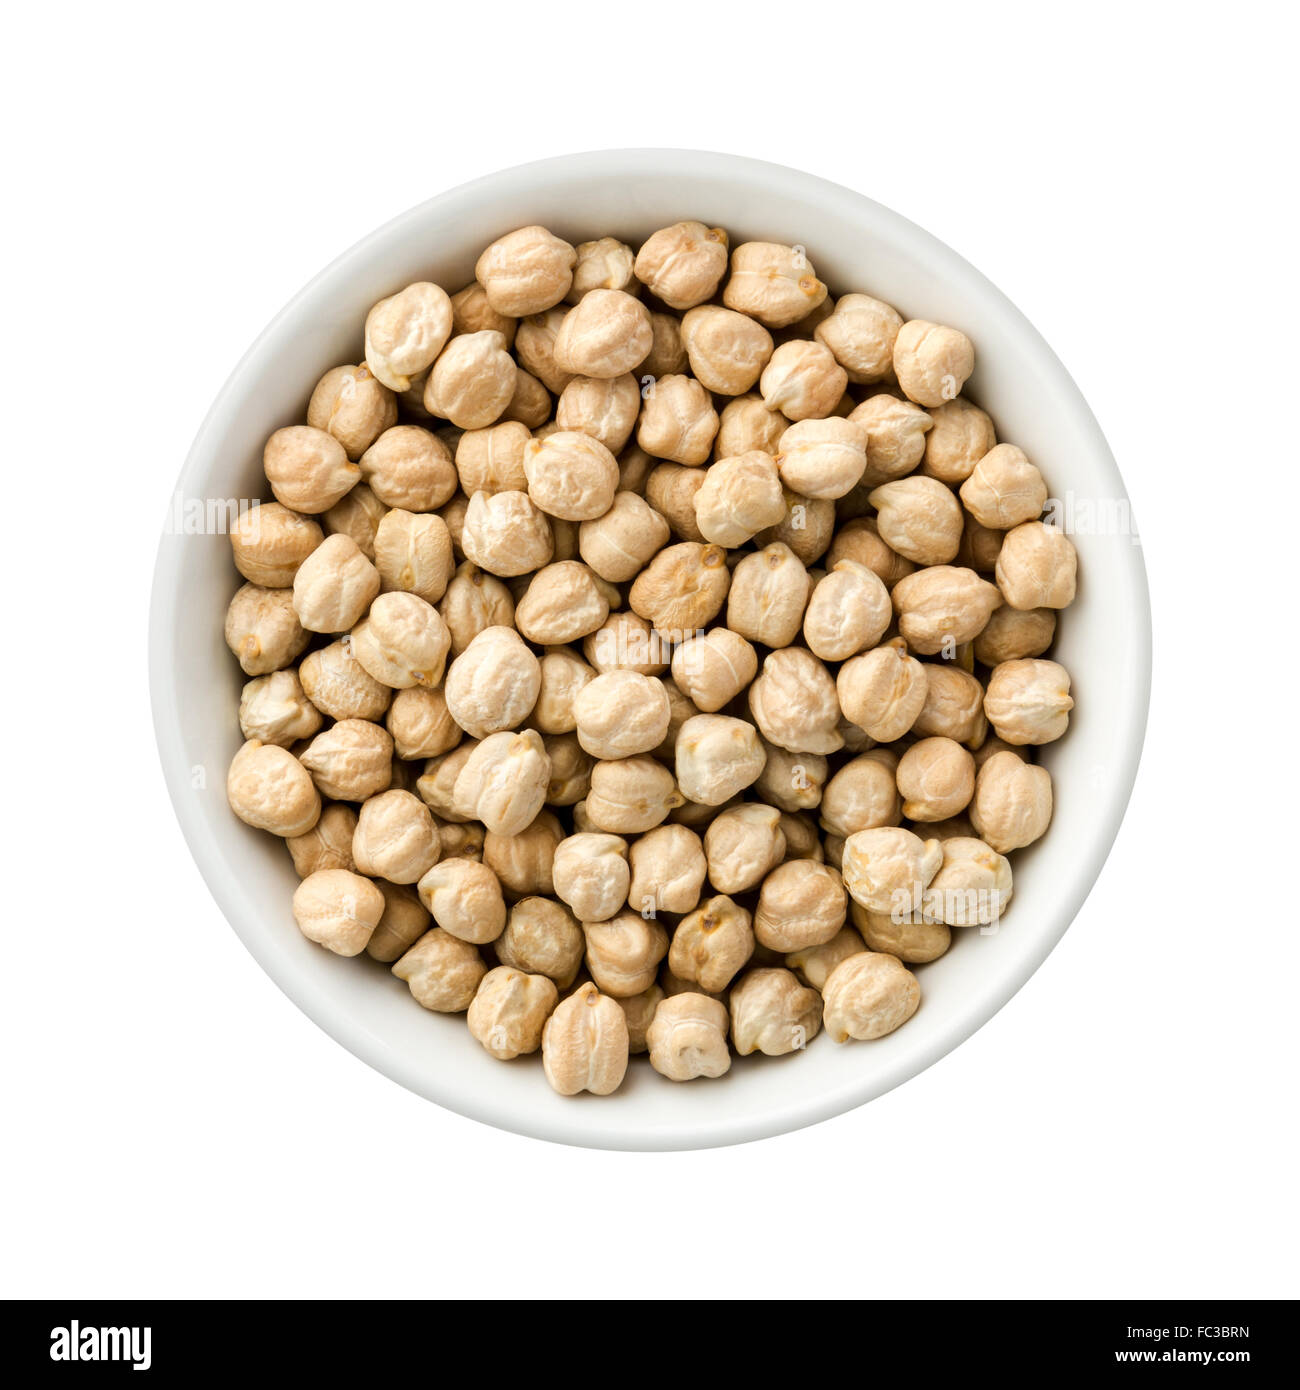 Chickpeas in a Ceramic Bowl Stock Photo